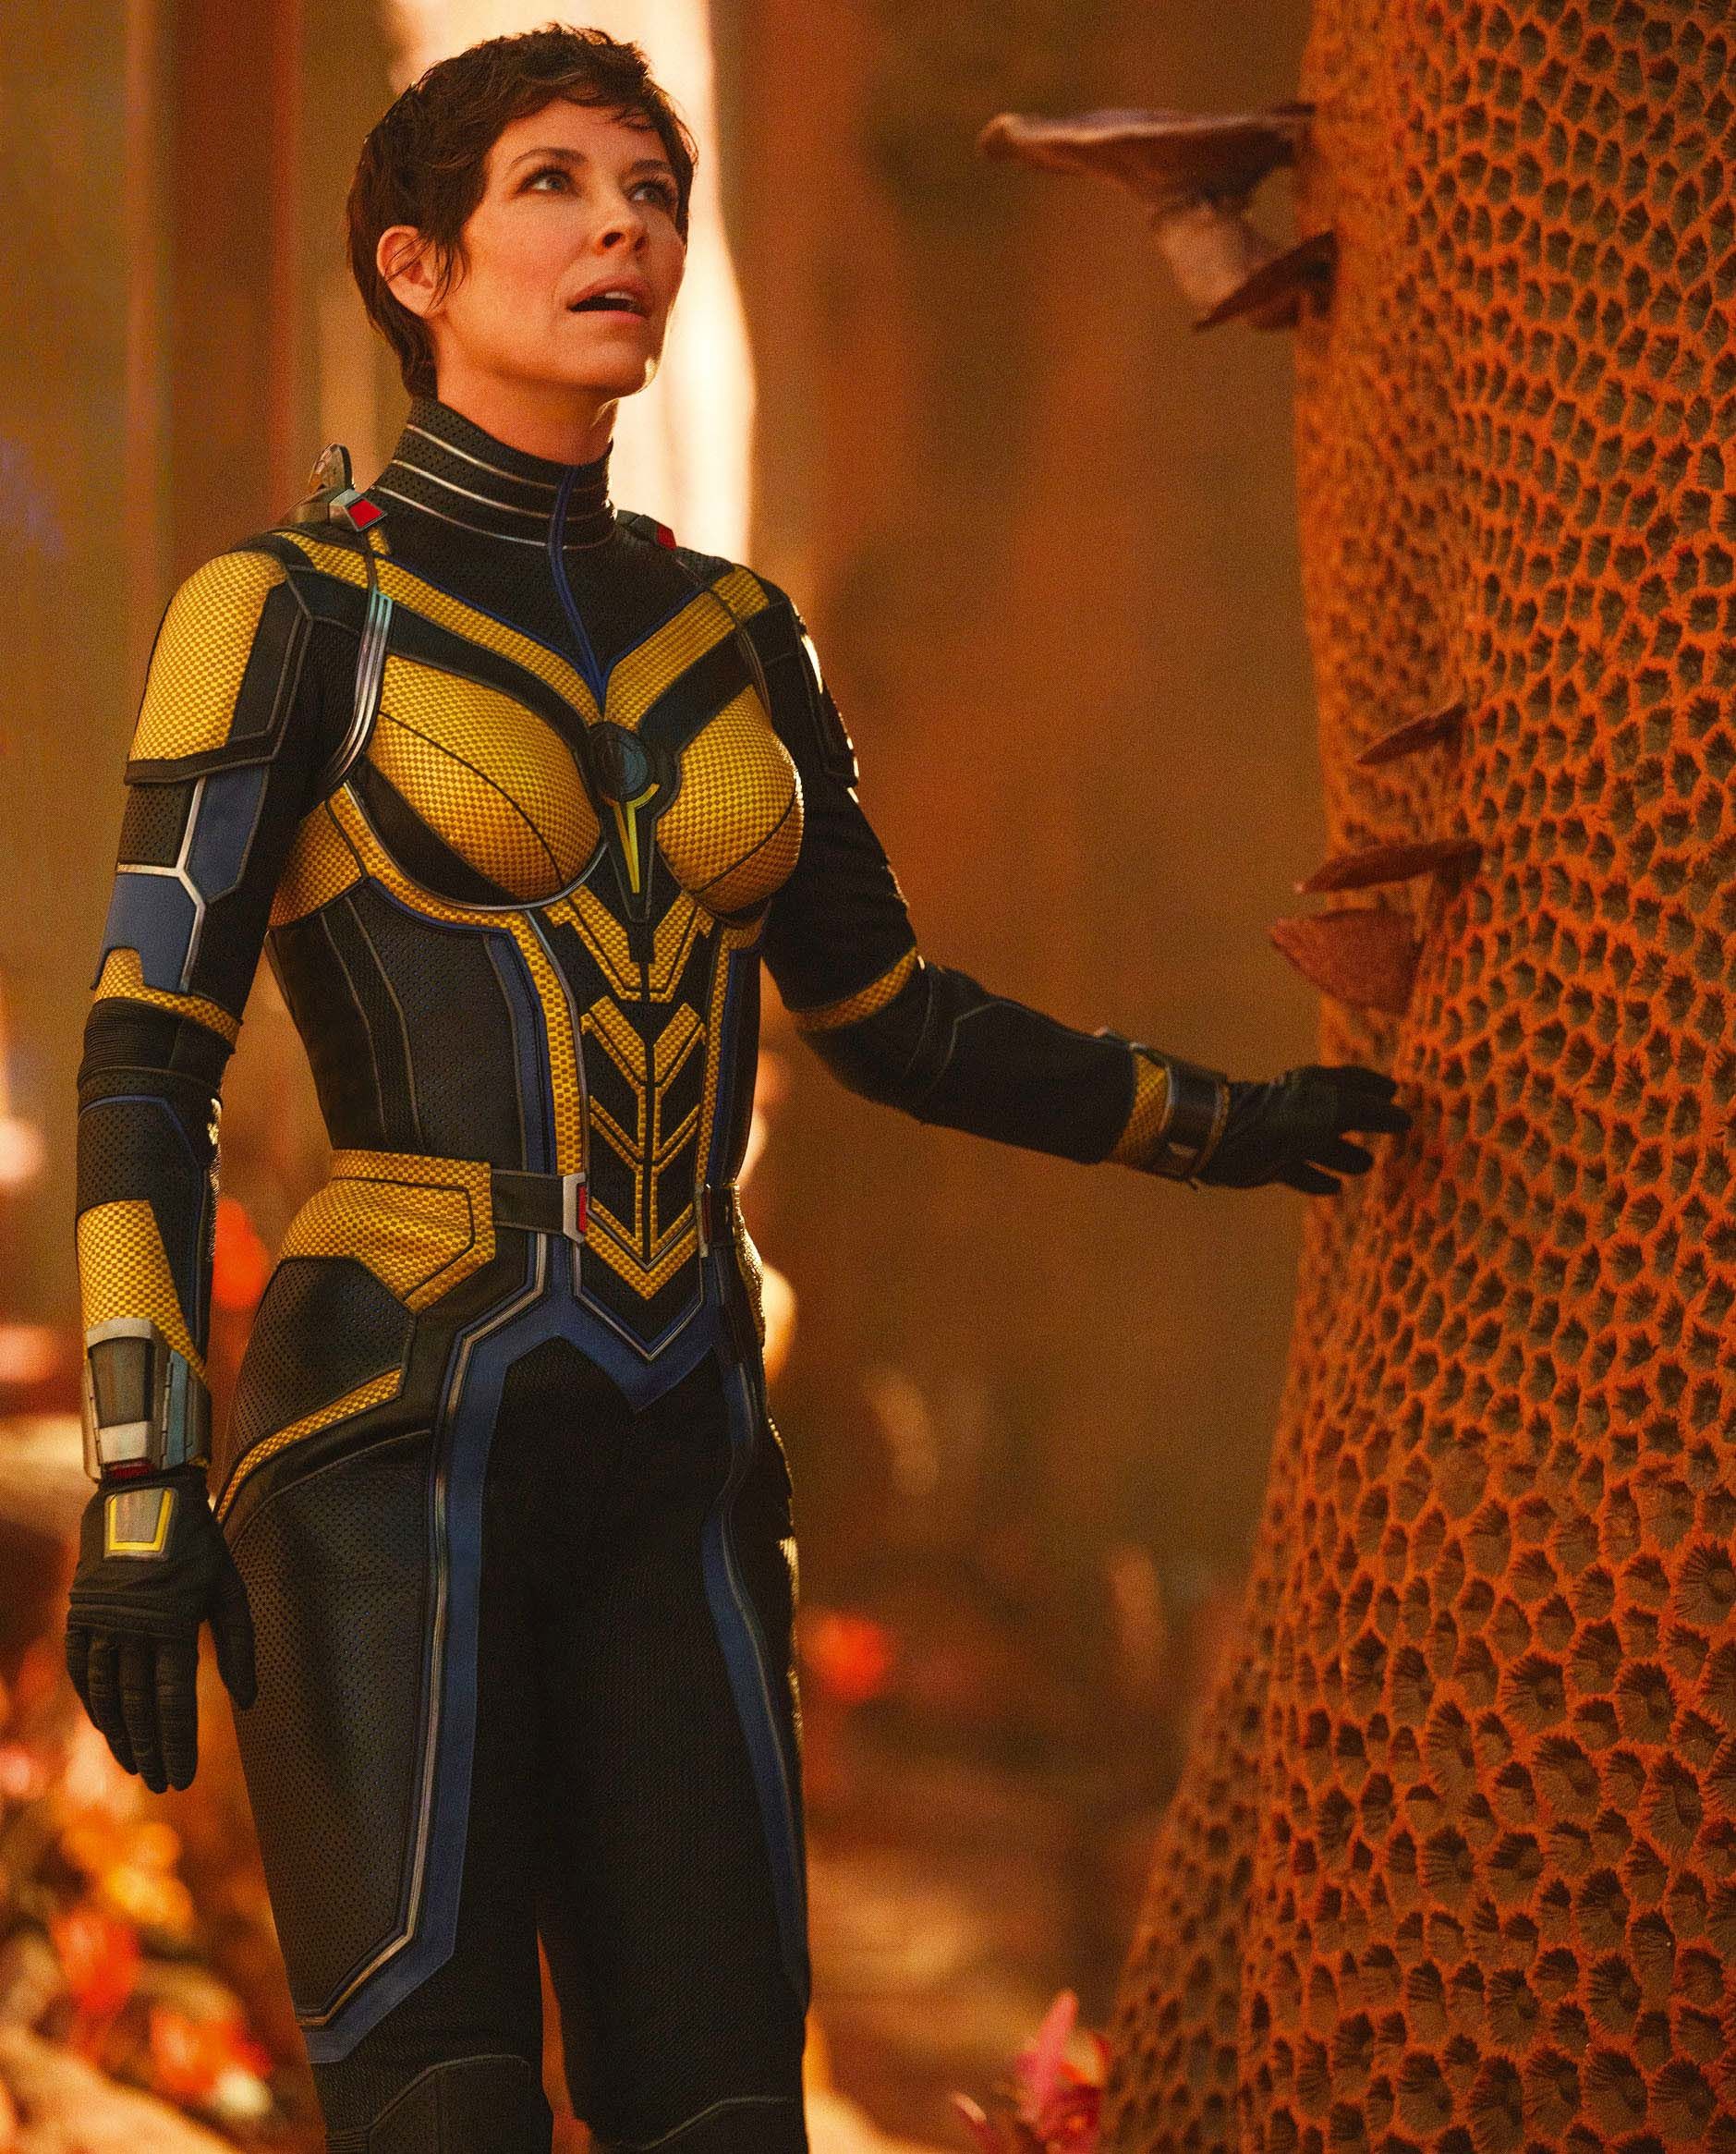 Evangeline Lilly is portraying the role of The Wasp in Ant-Man and The Wasp Quantumania.